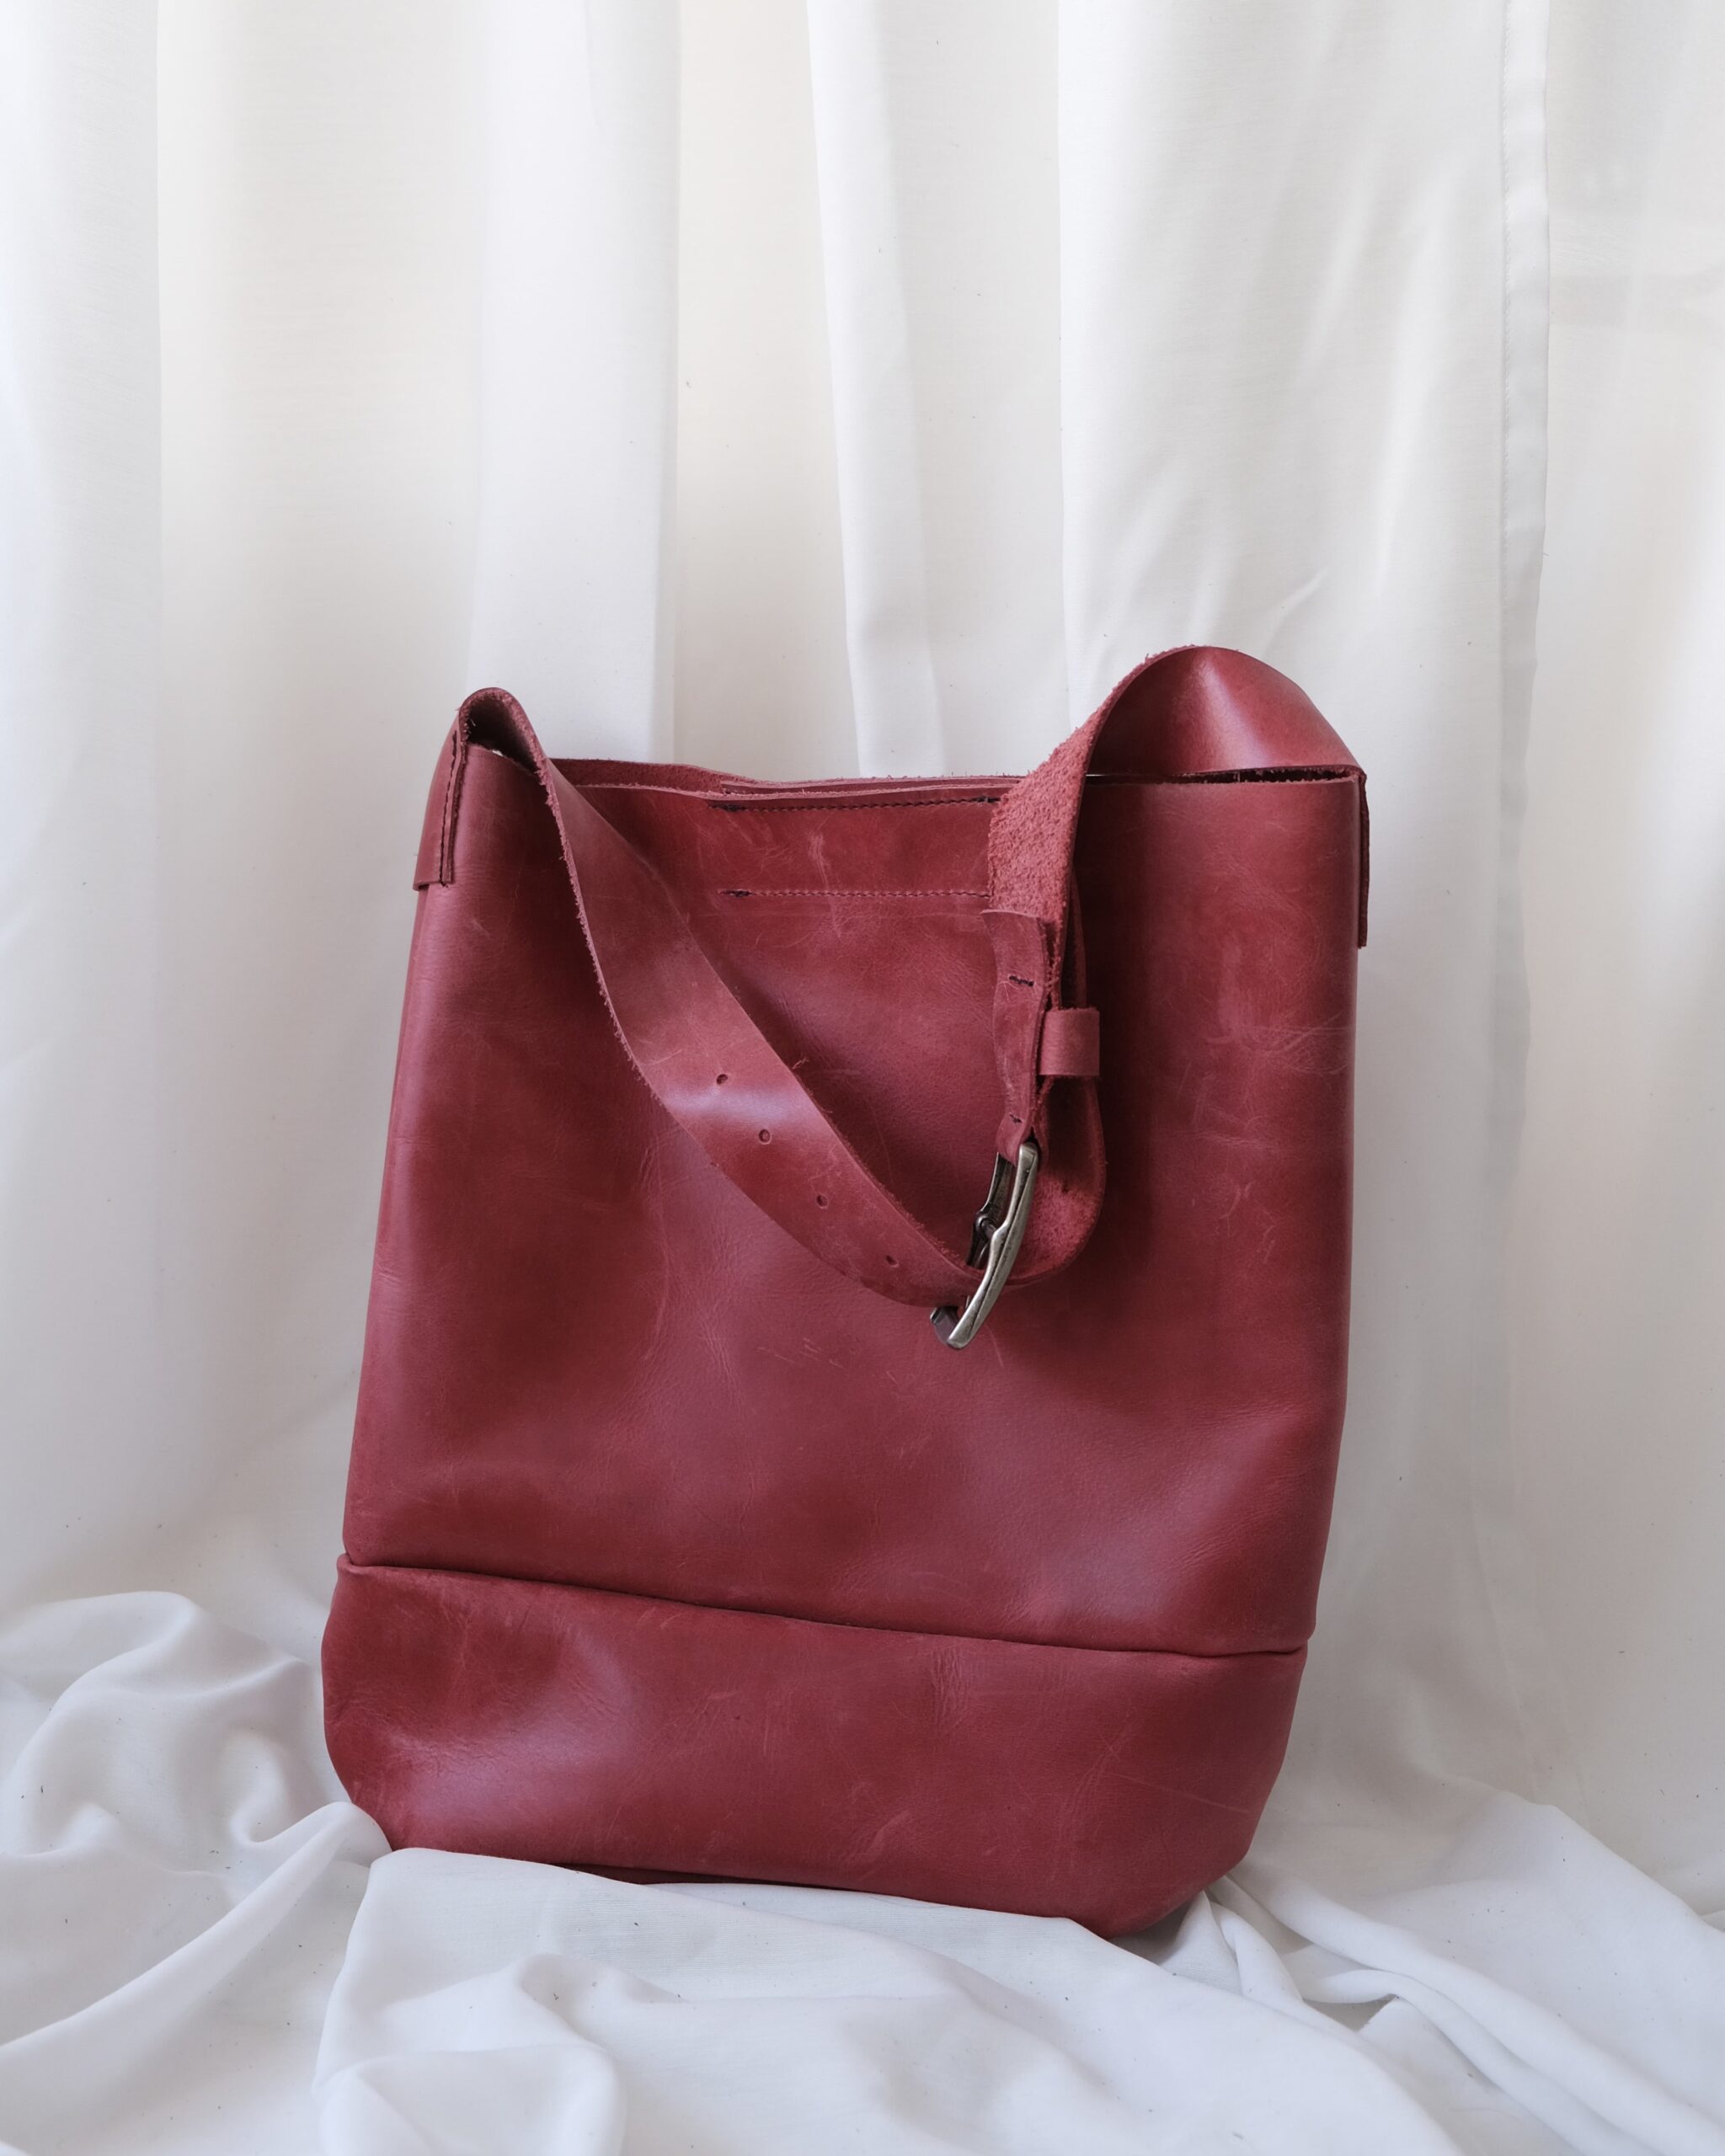 BUCKET BAG / RED / LEATHER - bohoandmore.